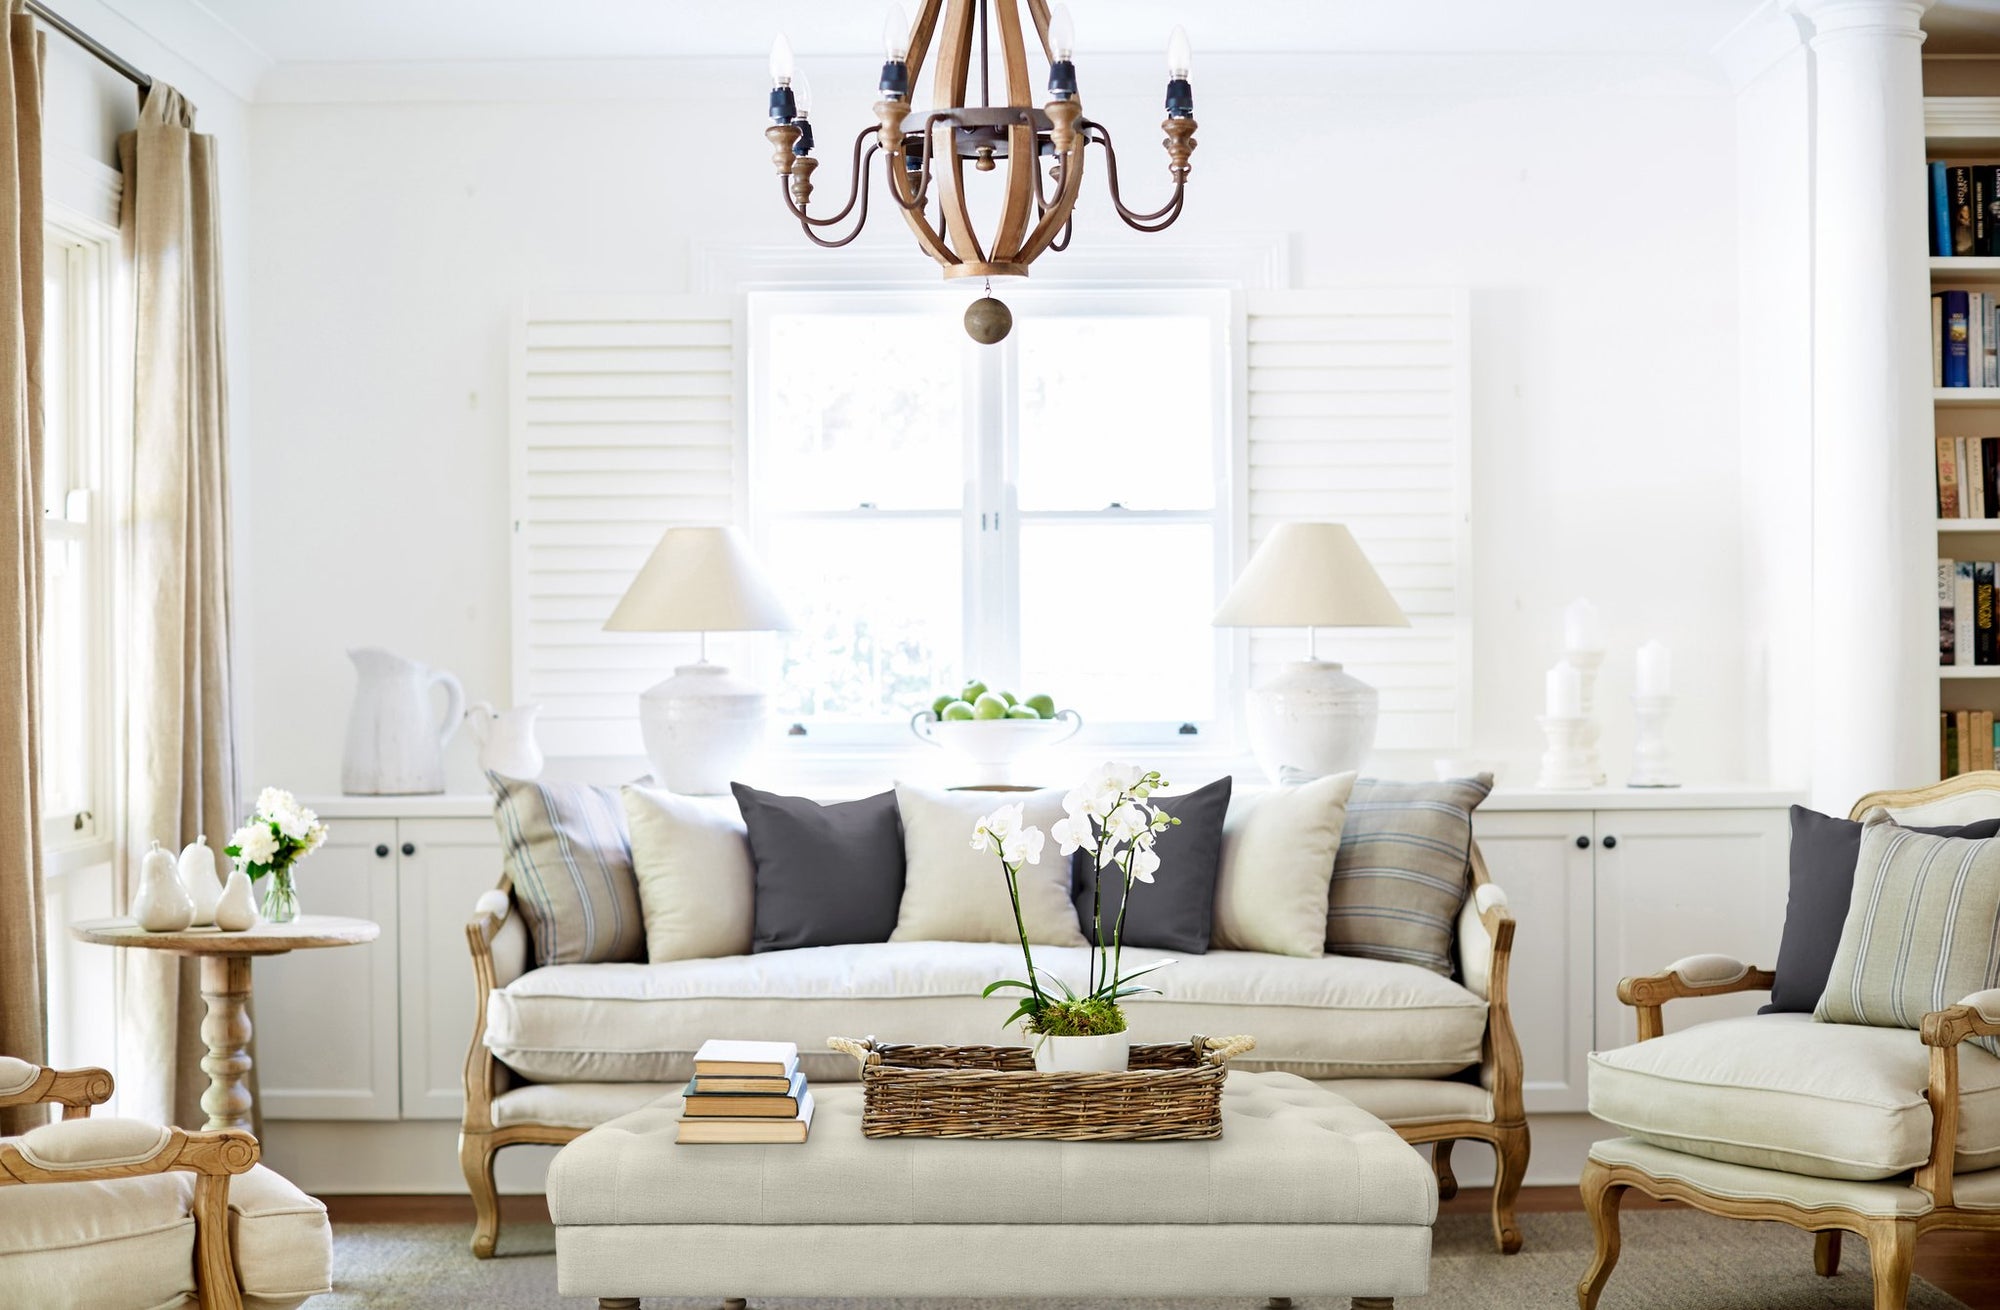 French Provincial Style - Relaxed Elegance for your Living Room